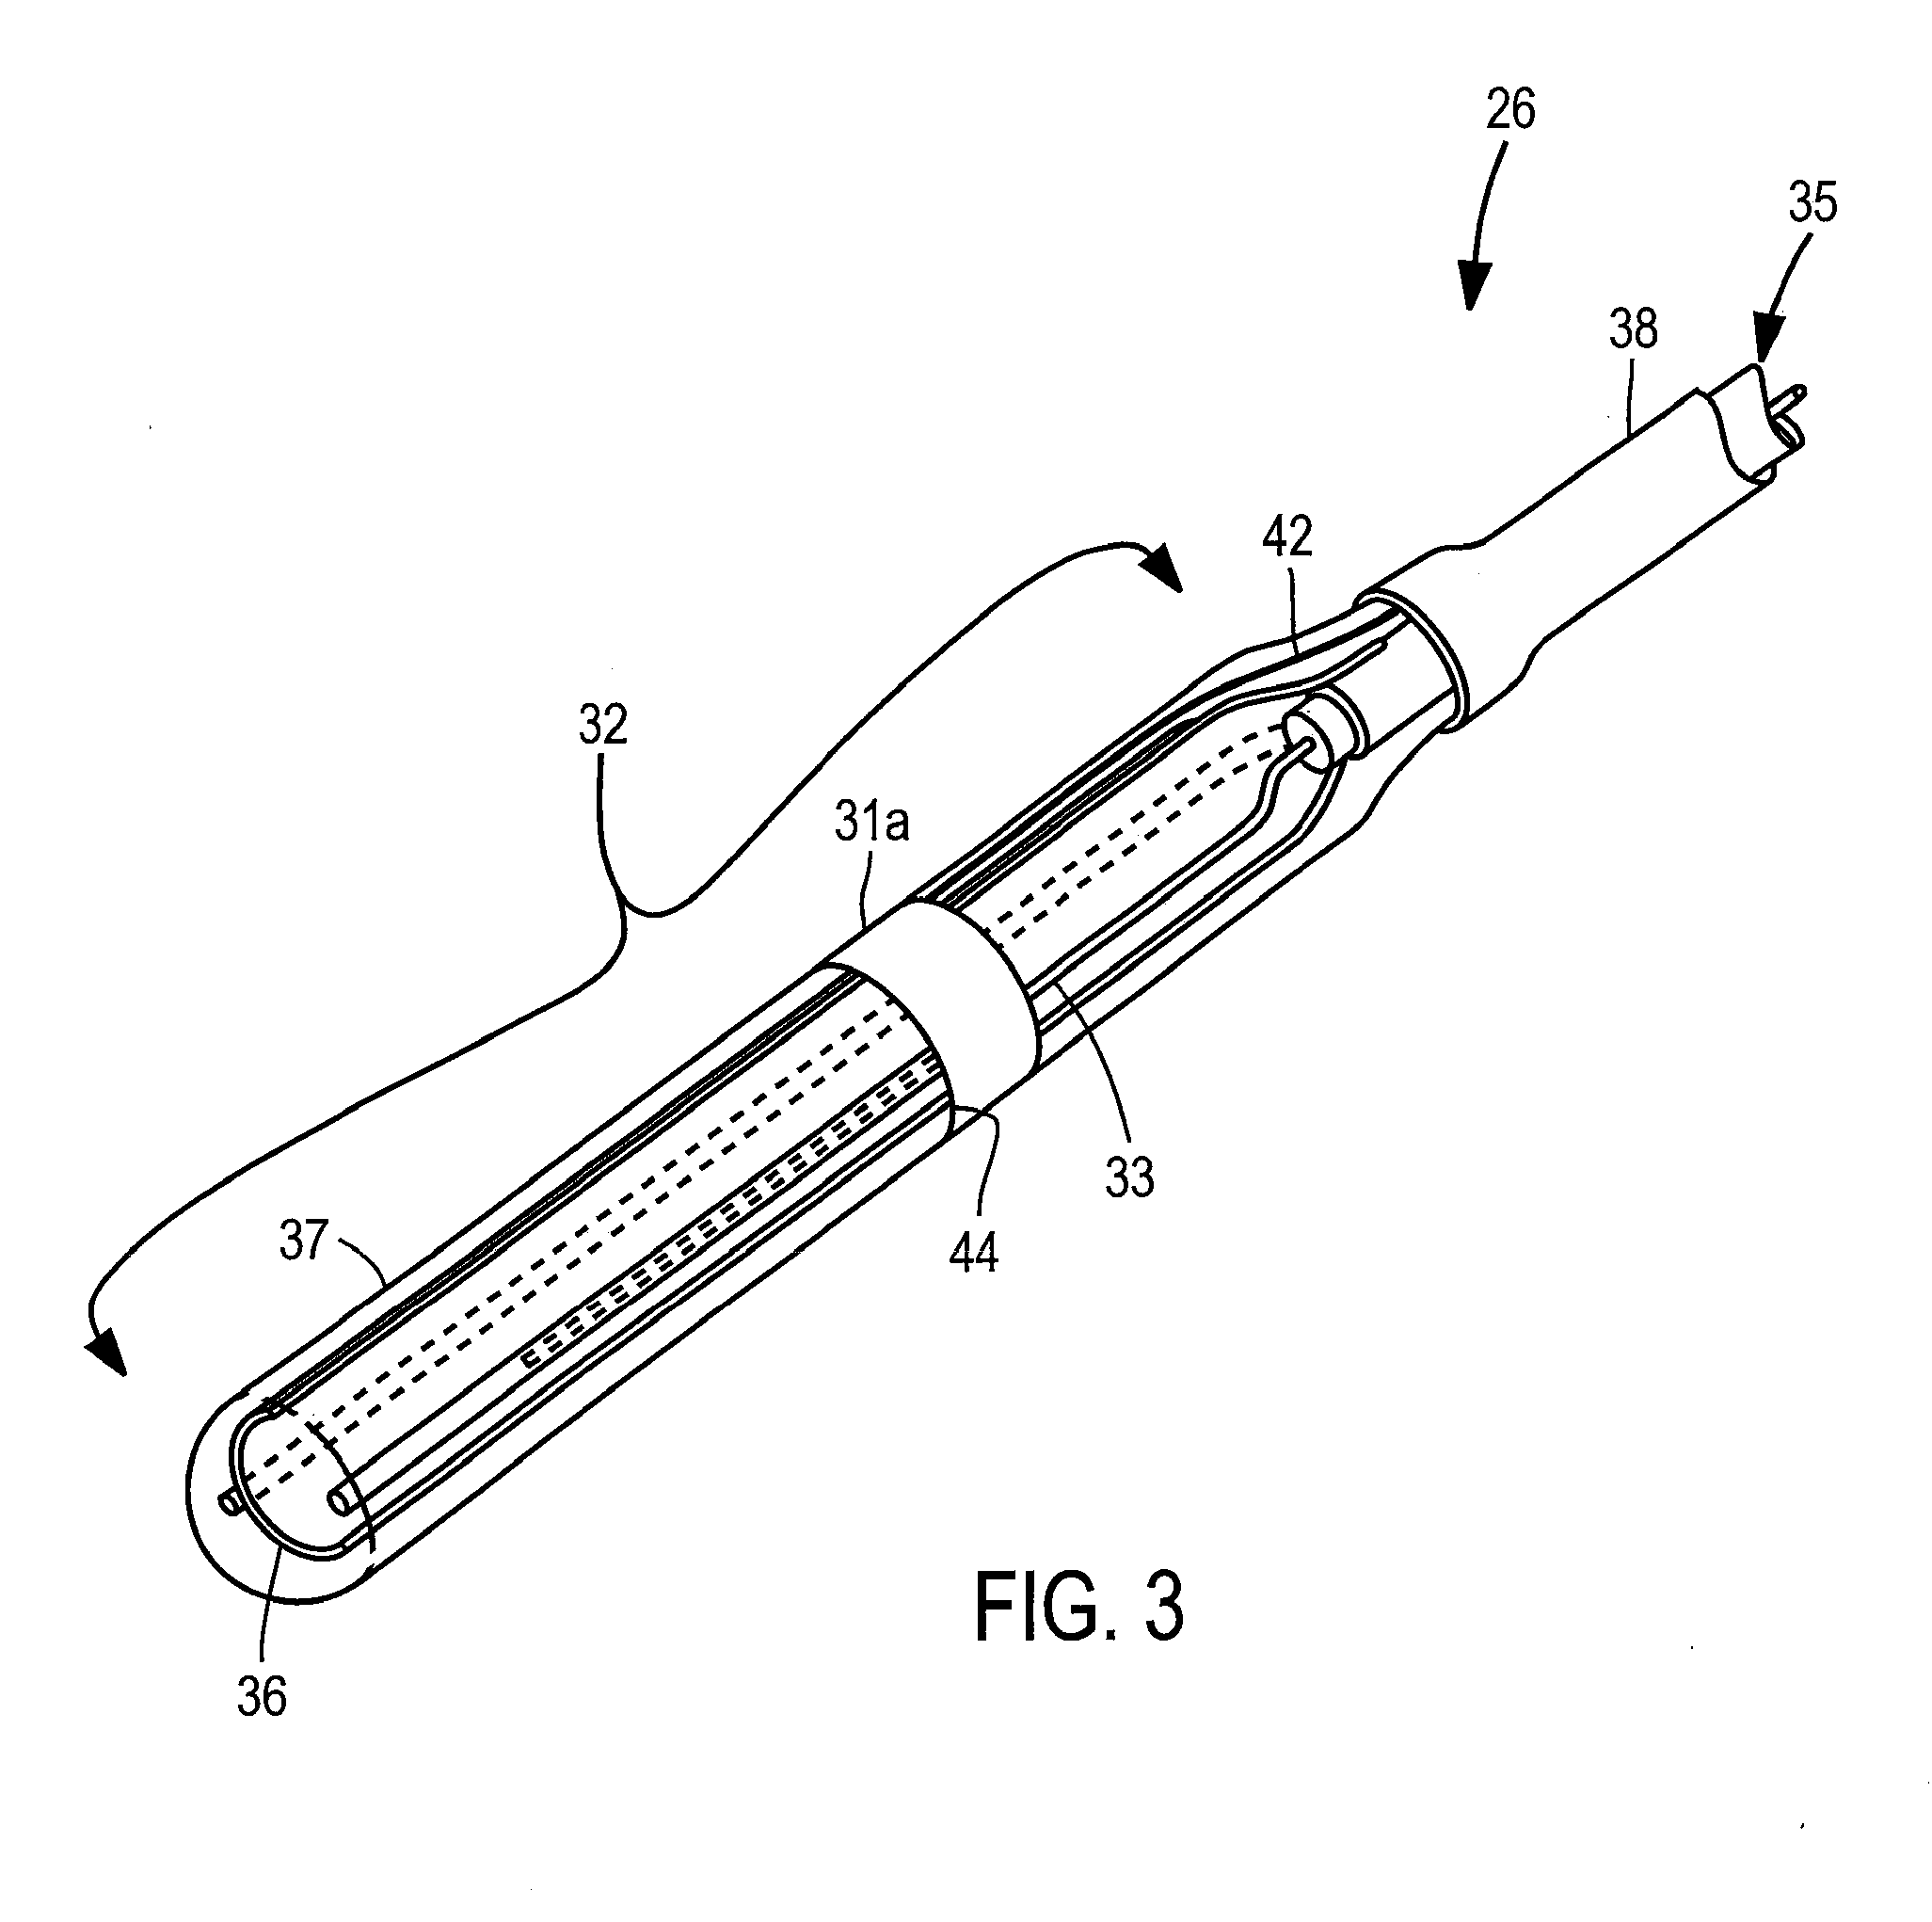 Apparatus and Method For Assessing Transmurality of a Tissue Ablation